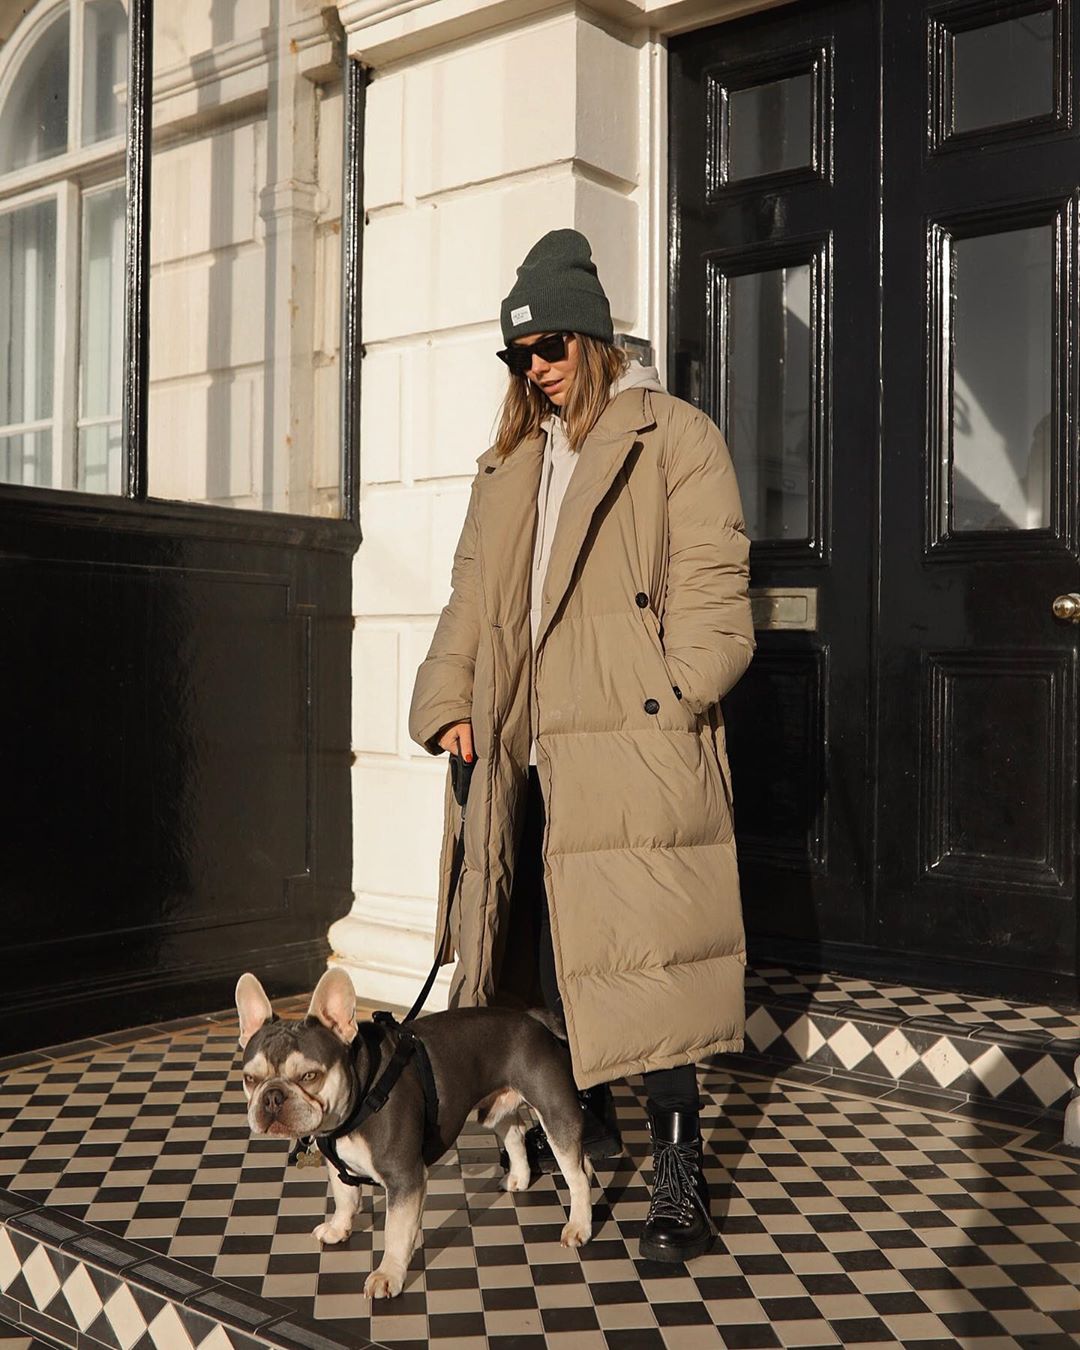 An Easy Winter Outfit Idea for Errand-Running and Dog-Walking